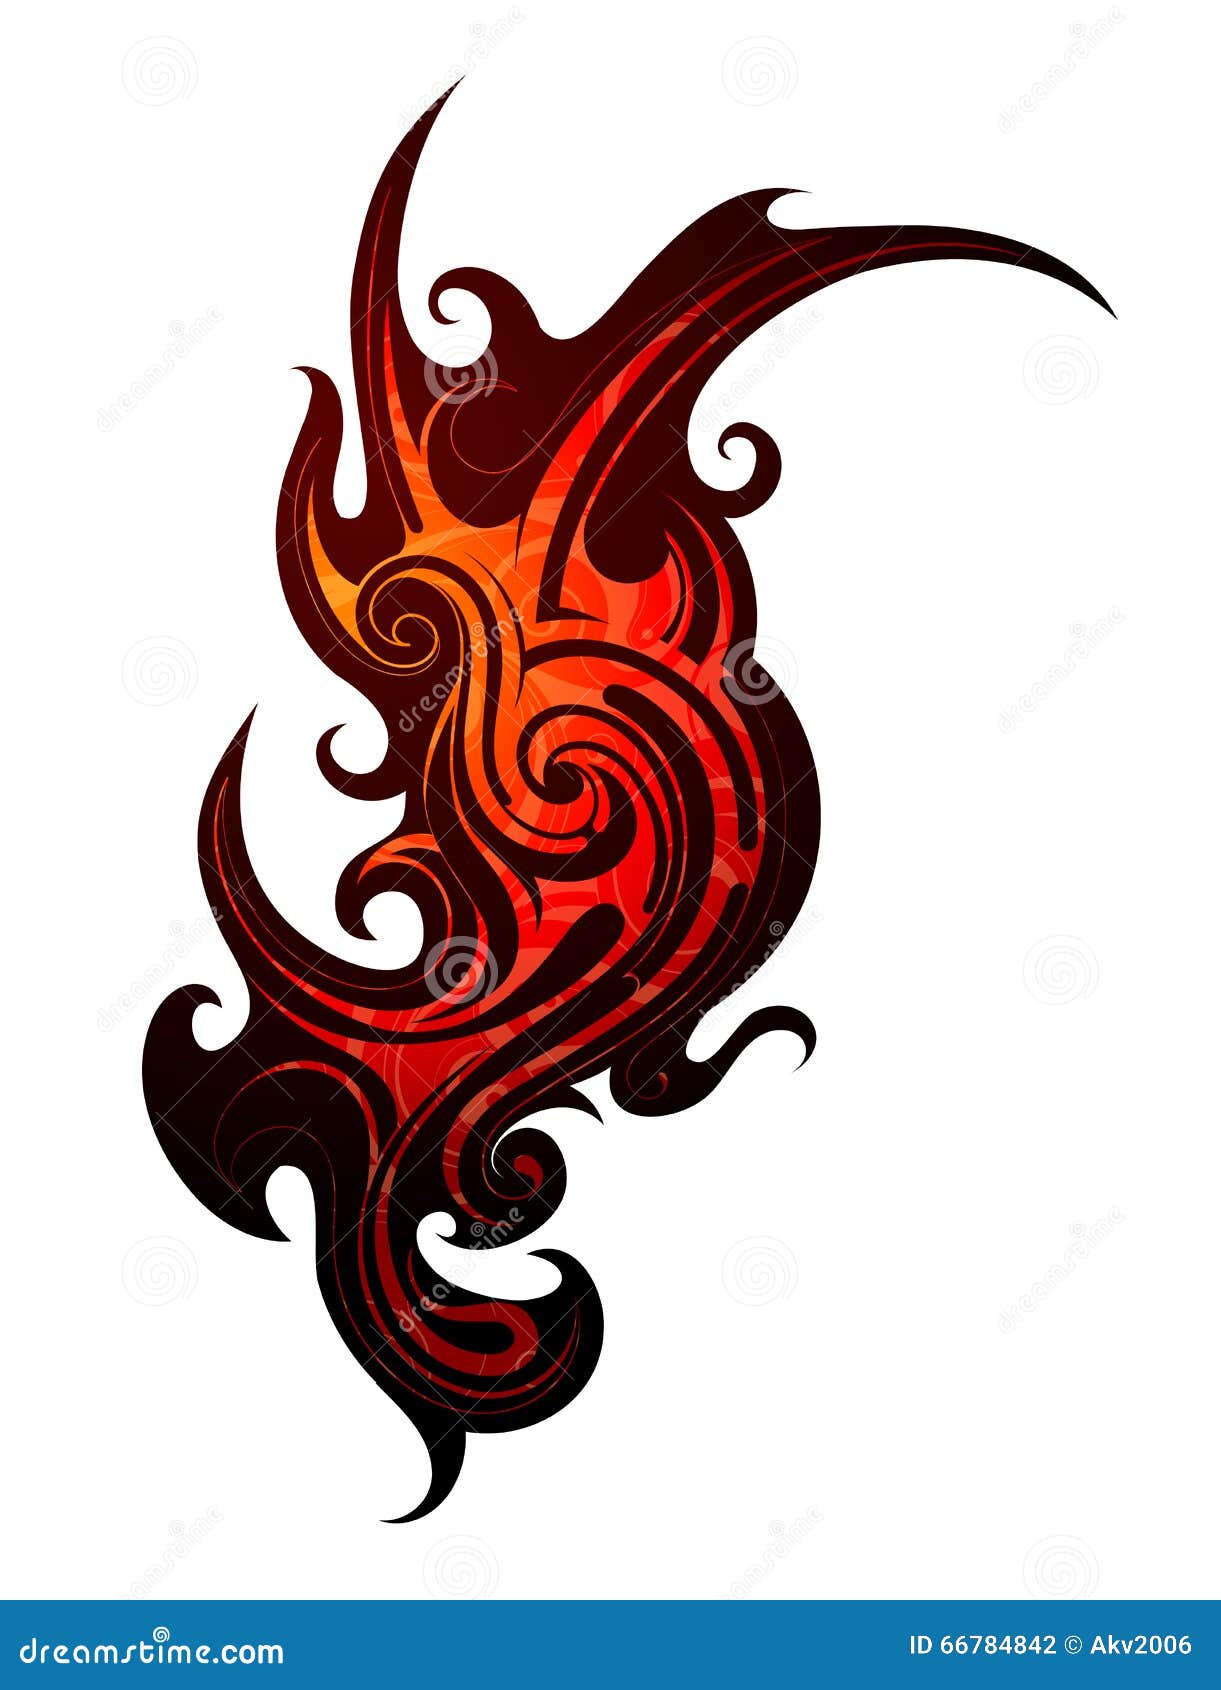 Fire Flame Tattoo Stock Vector (Royalty Free) 43803229 | Shutterstock